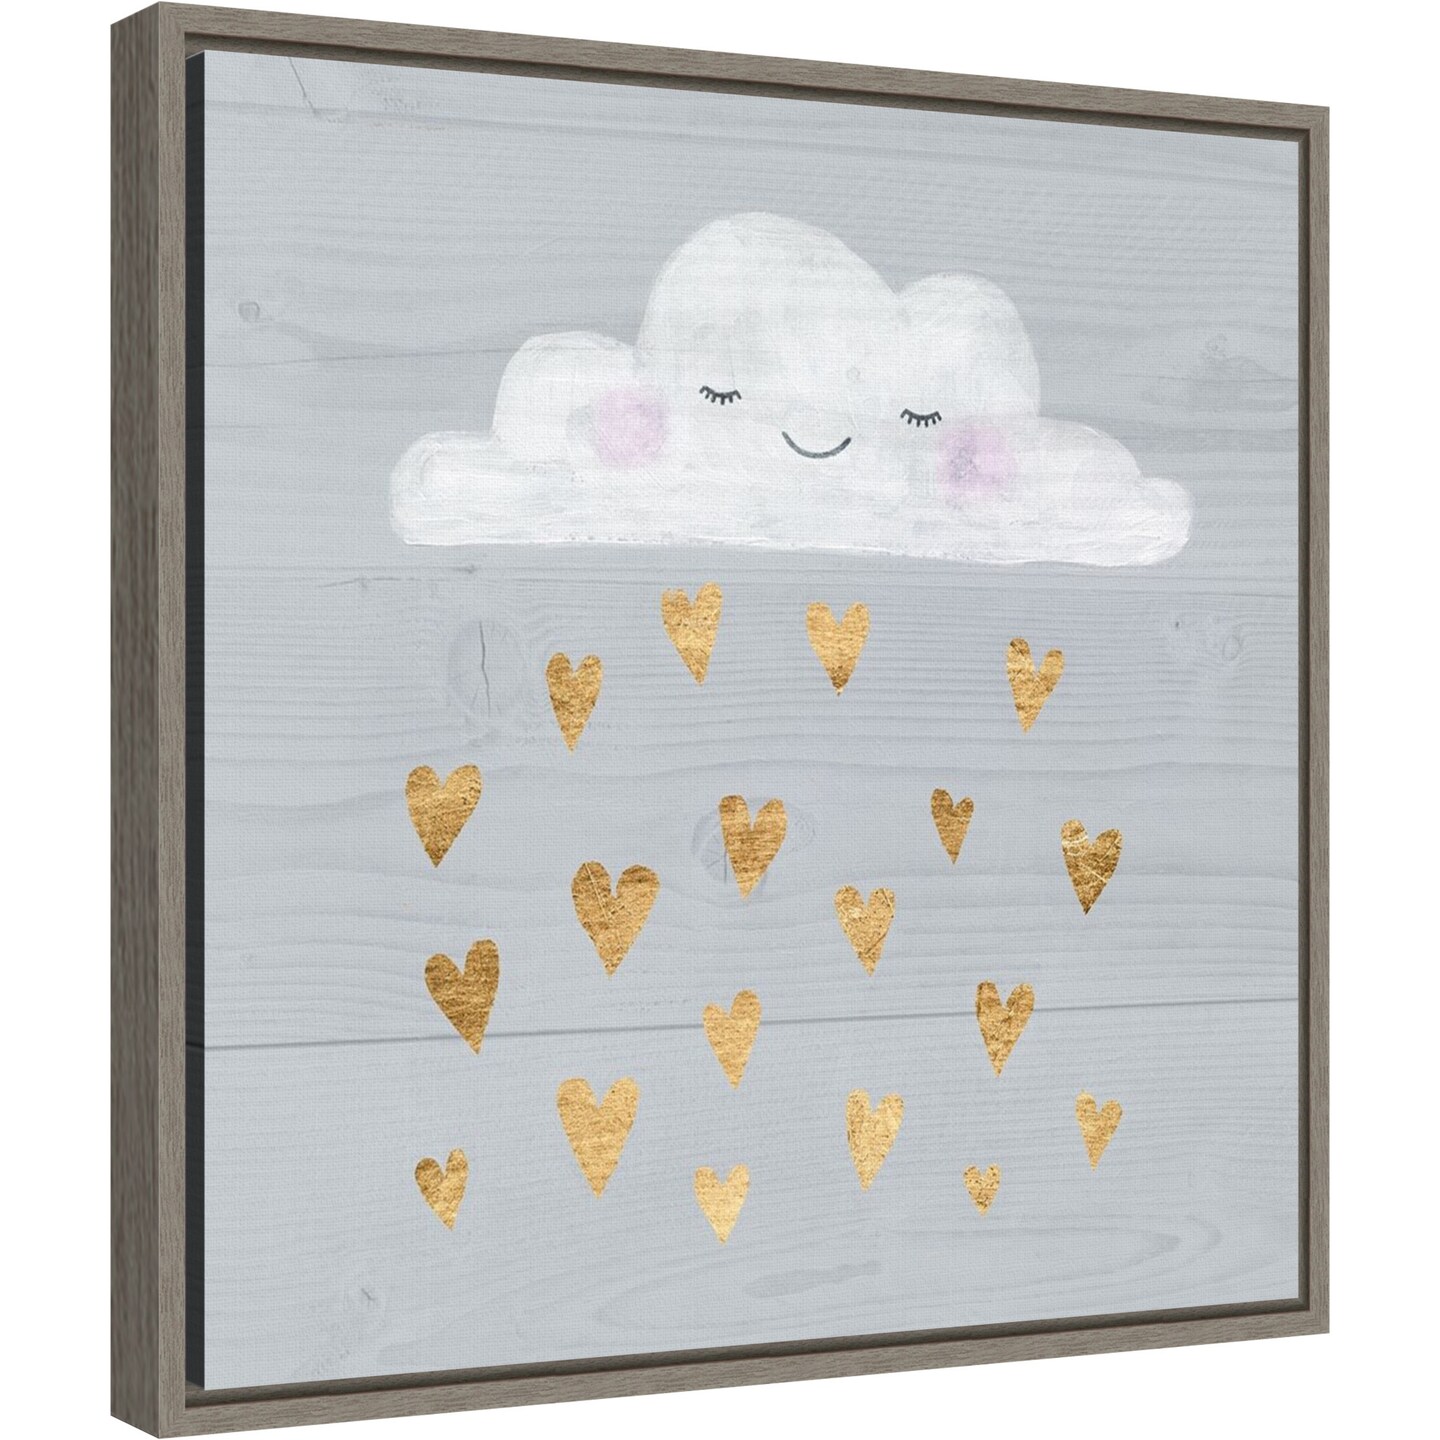 Sweet Dreams III by Victoria Borges 16-in. W x 16-in. H. Canvas Wall Art Print Framed in Grey